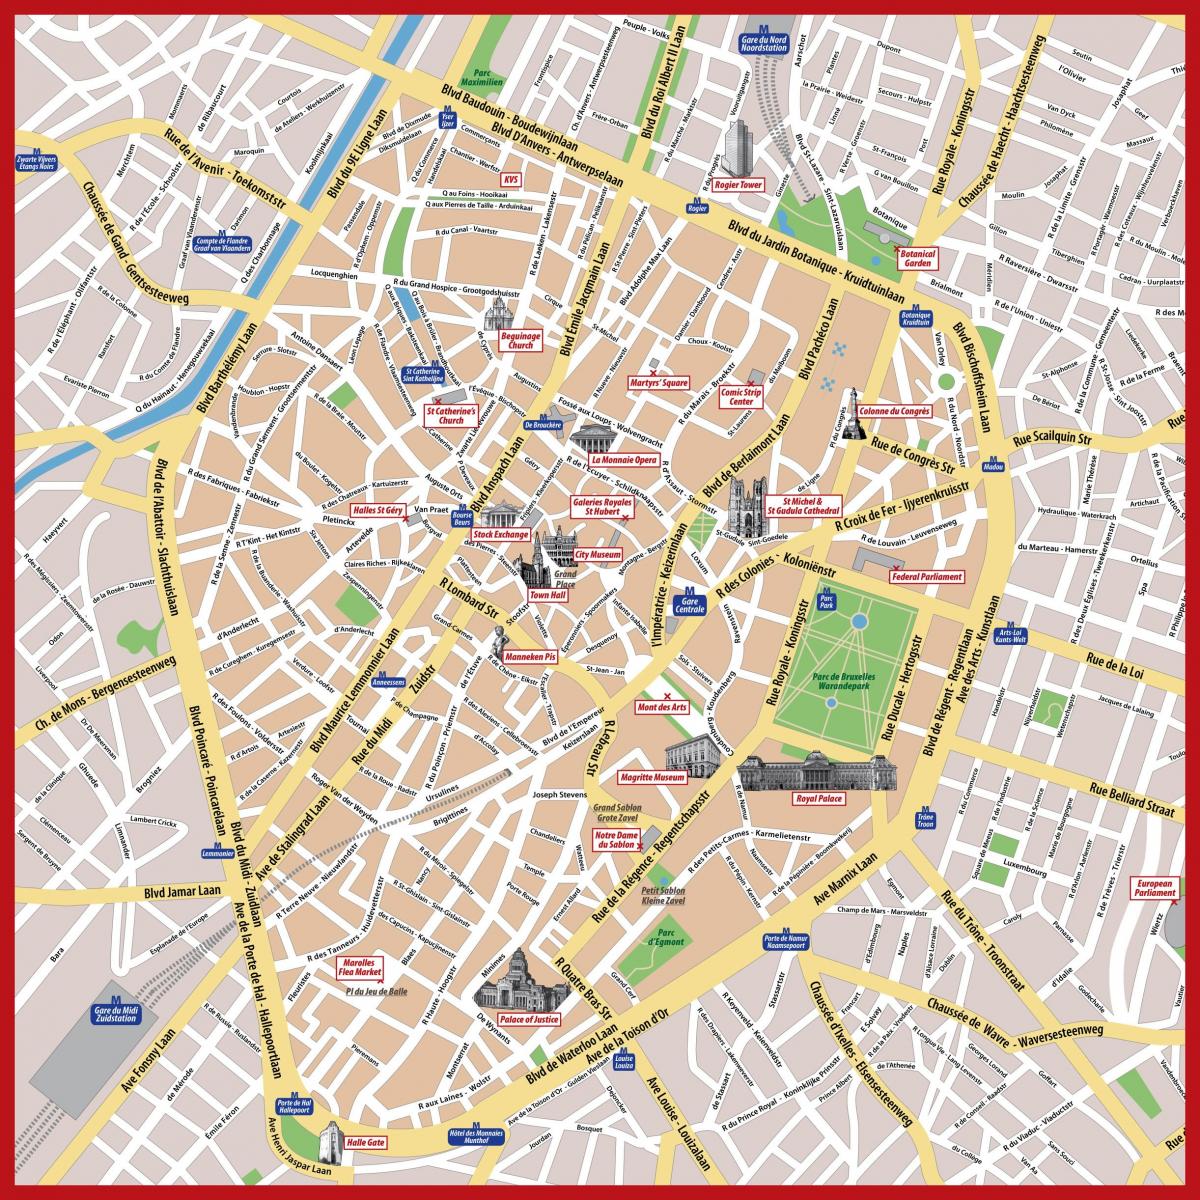 map of Brussels belgium attractions